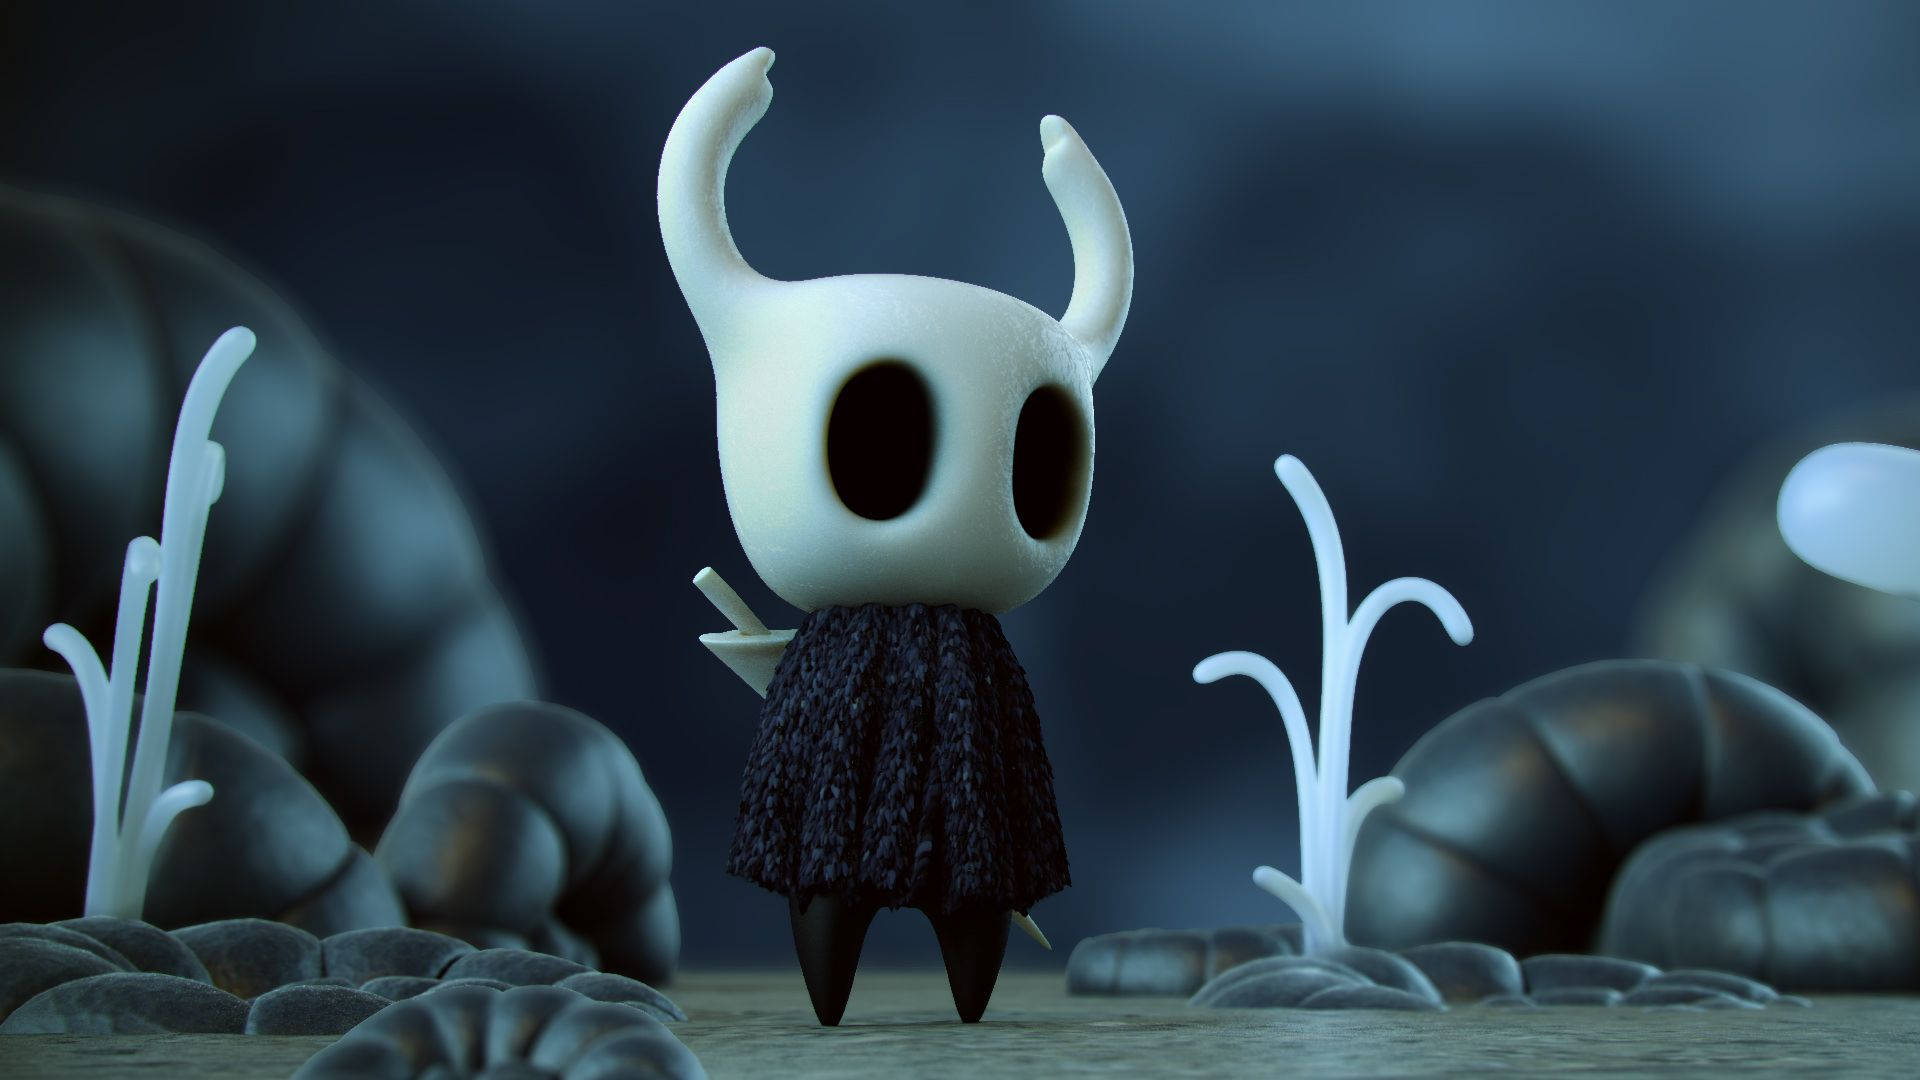 Take on the darkest night with the Hollow Knight Wallpaper